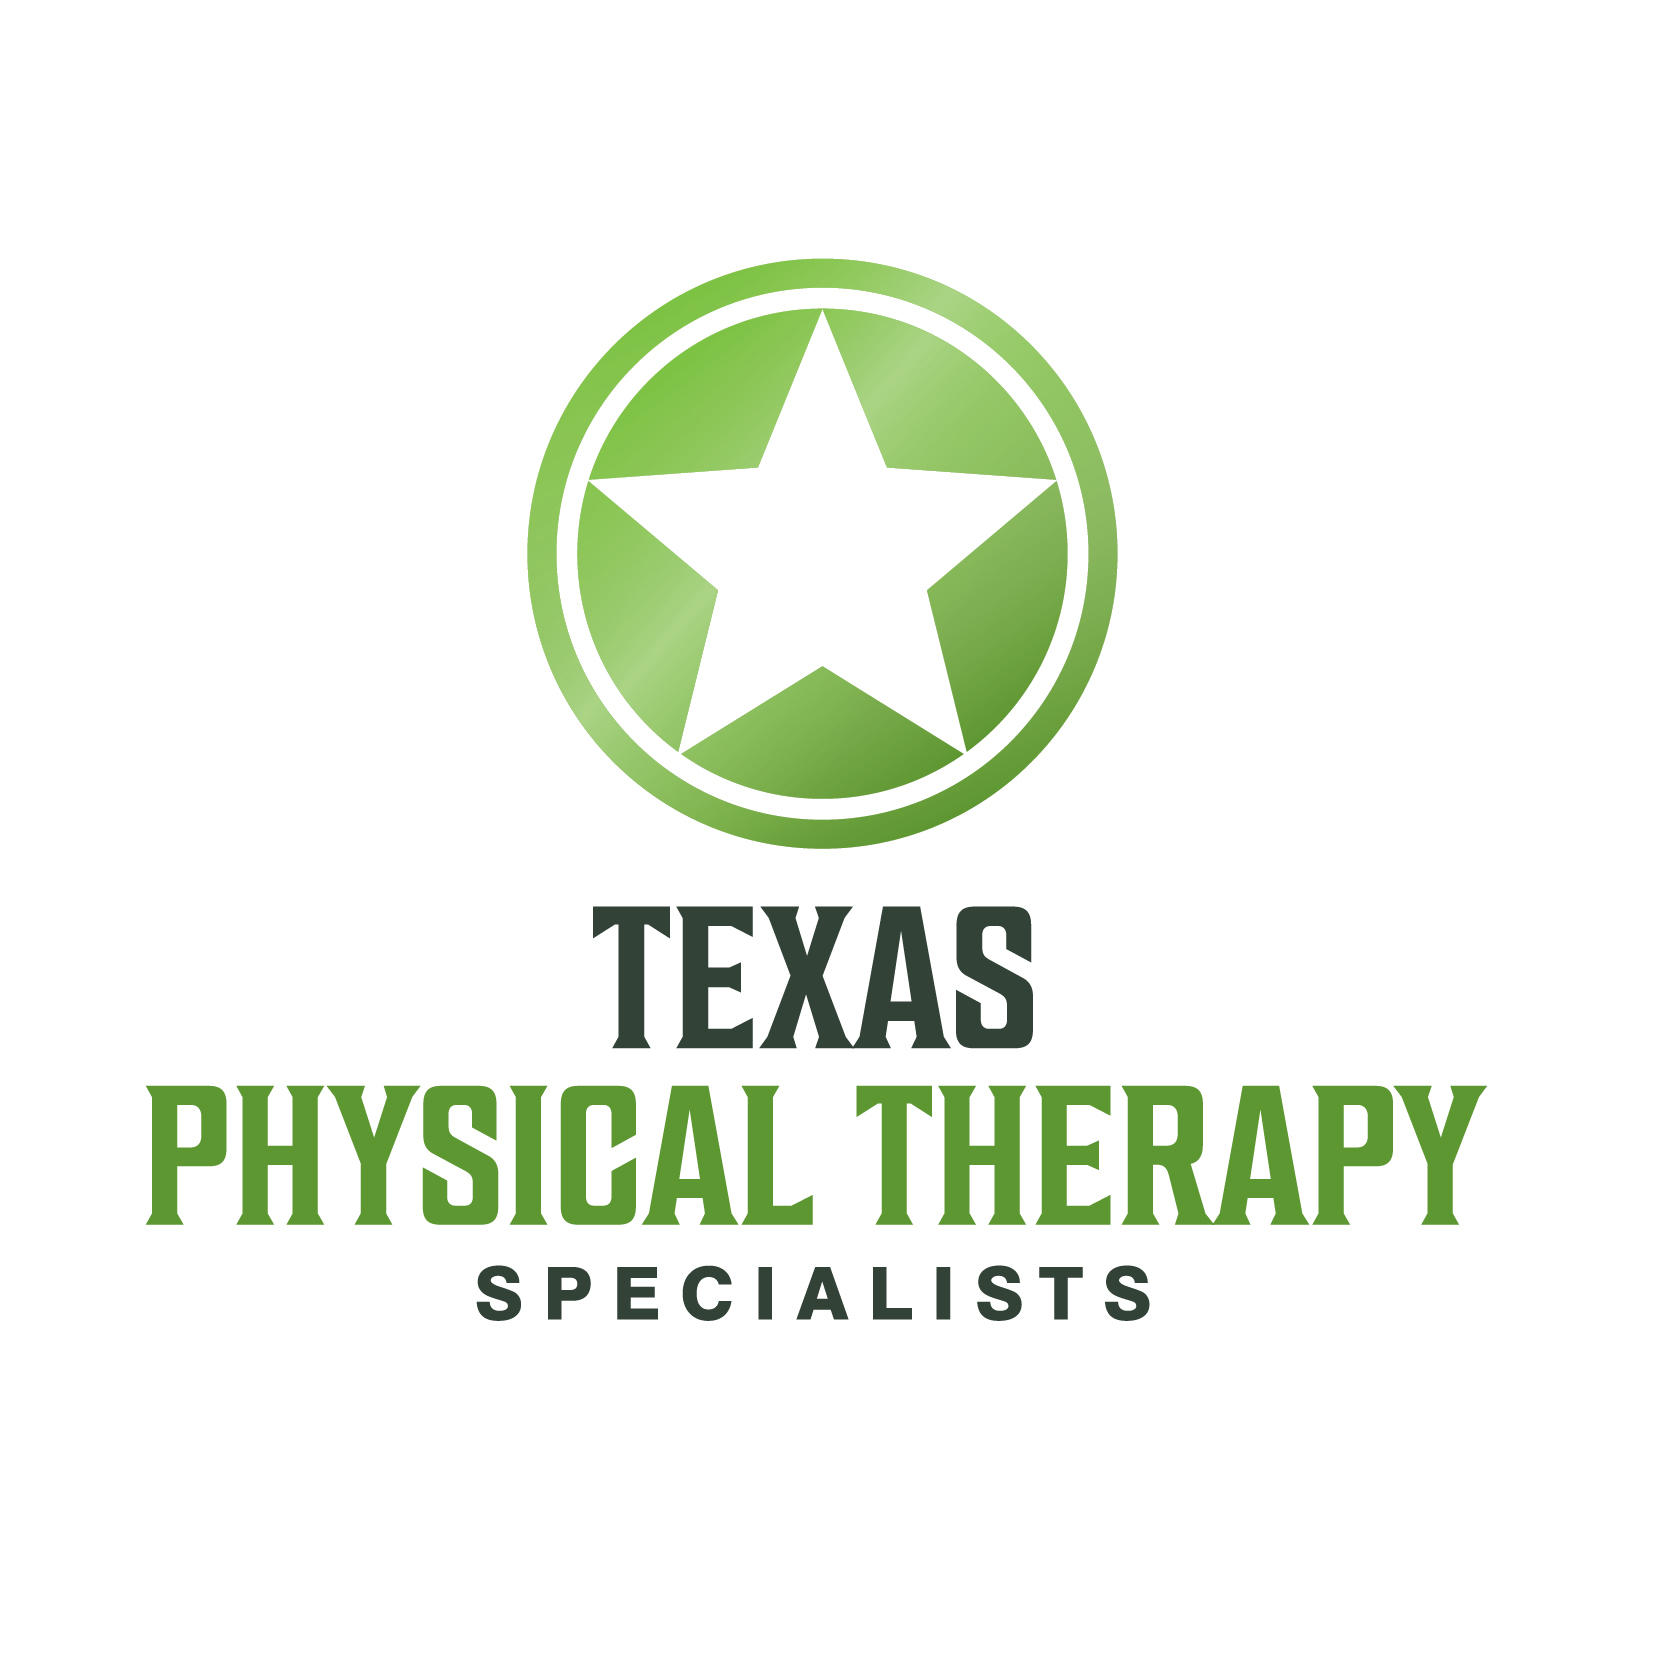 Texas Physical Therapy Specialists Photo